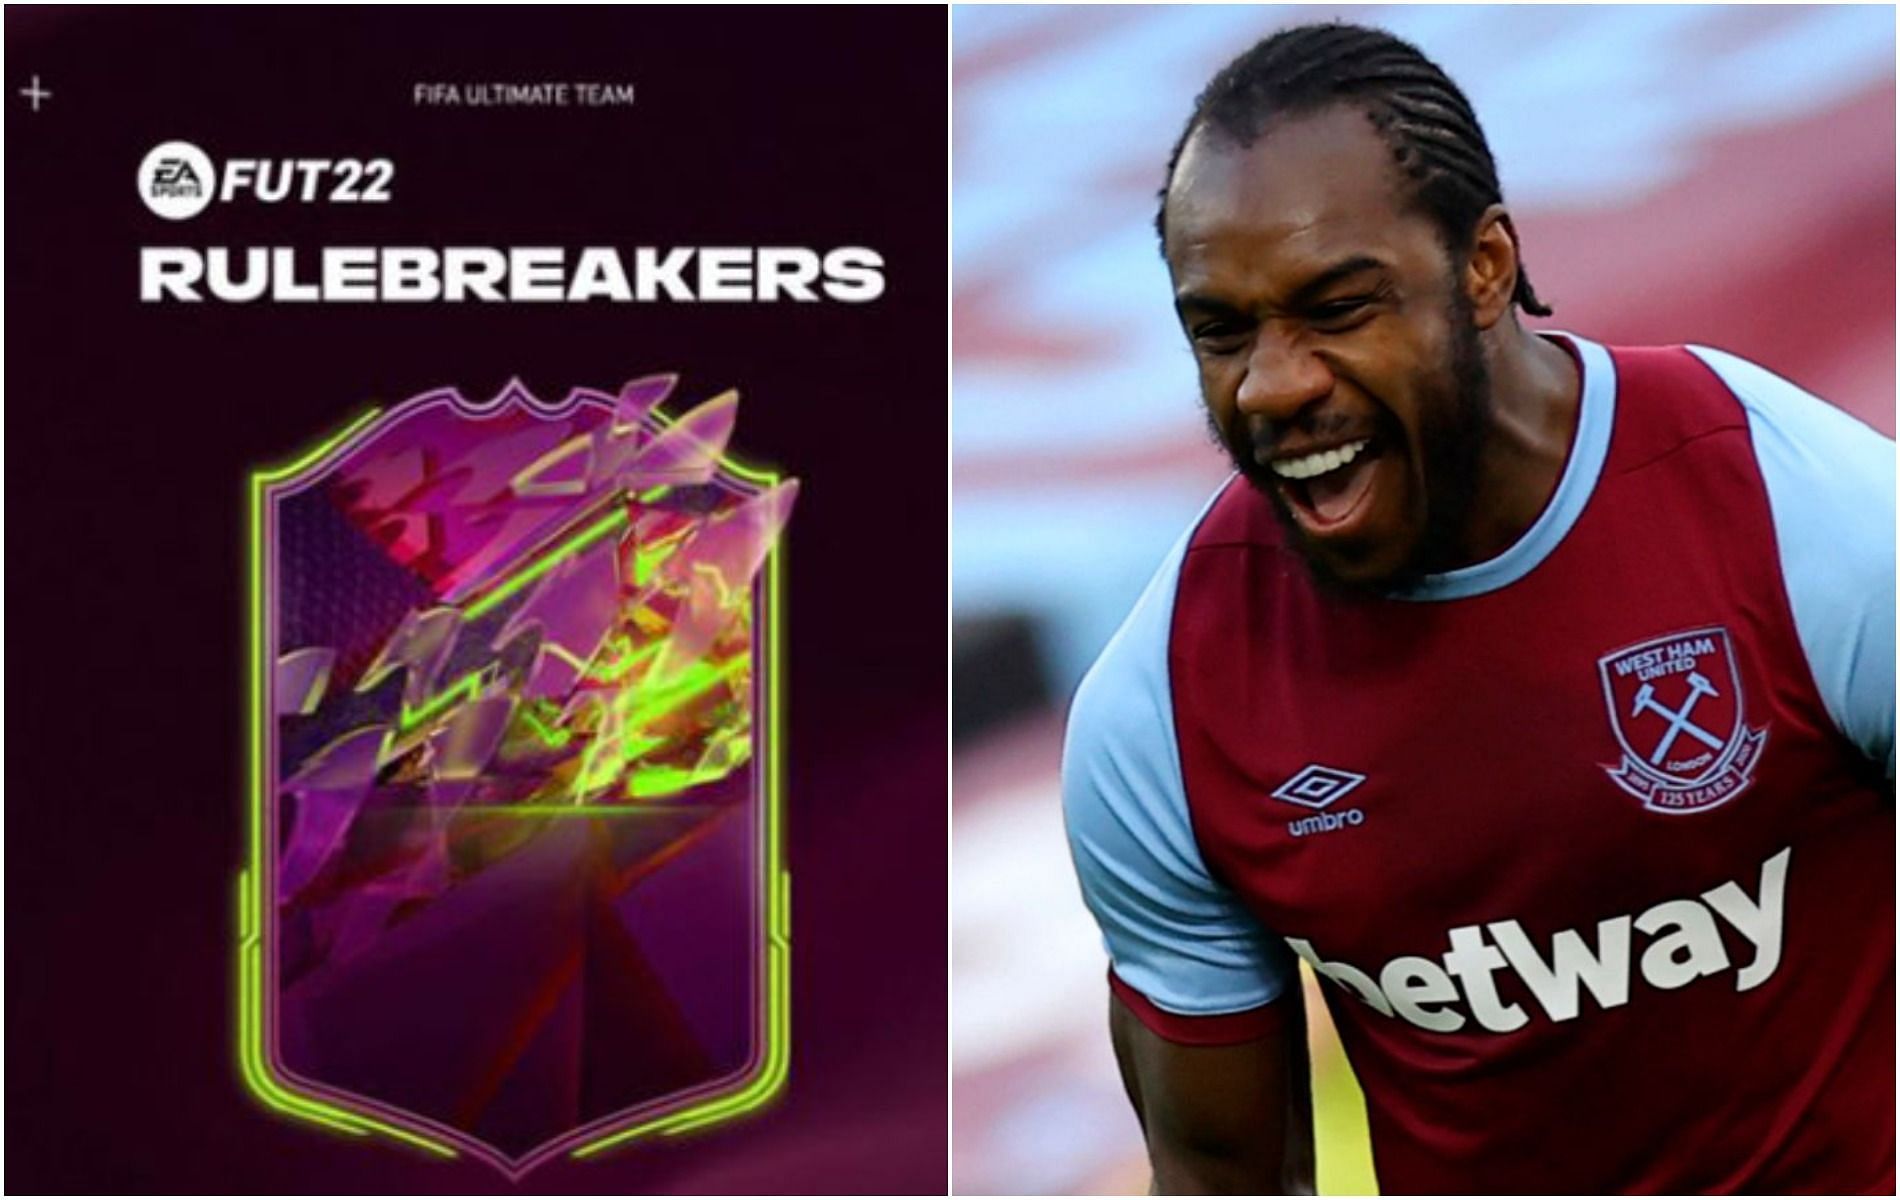 Michail Antonio Rulebreakers card is available as part of weekly objectives in FIFA 22